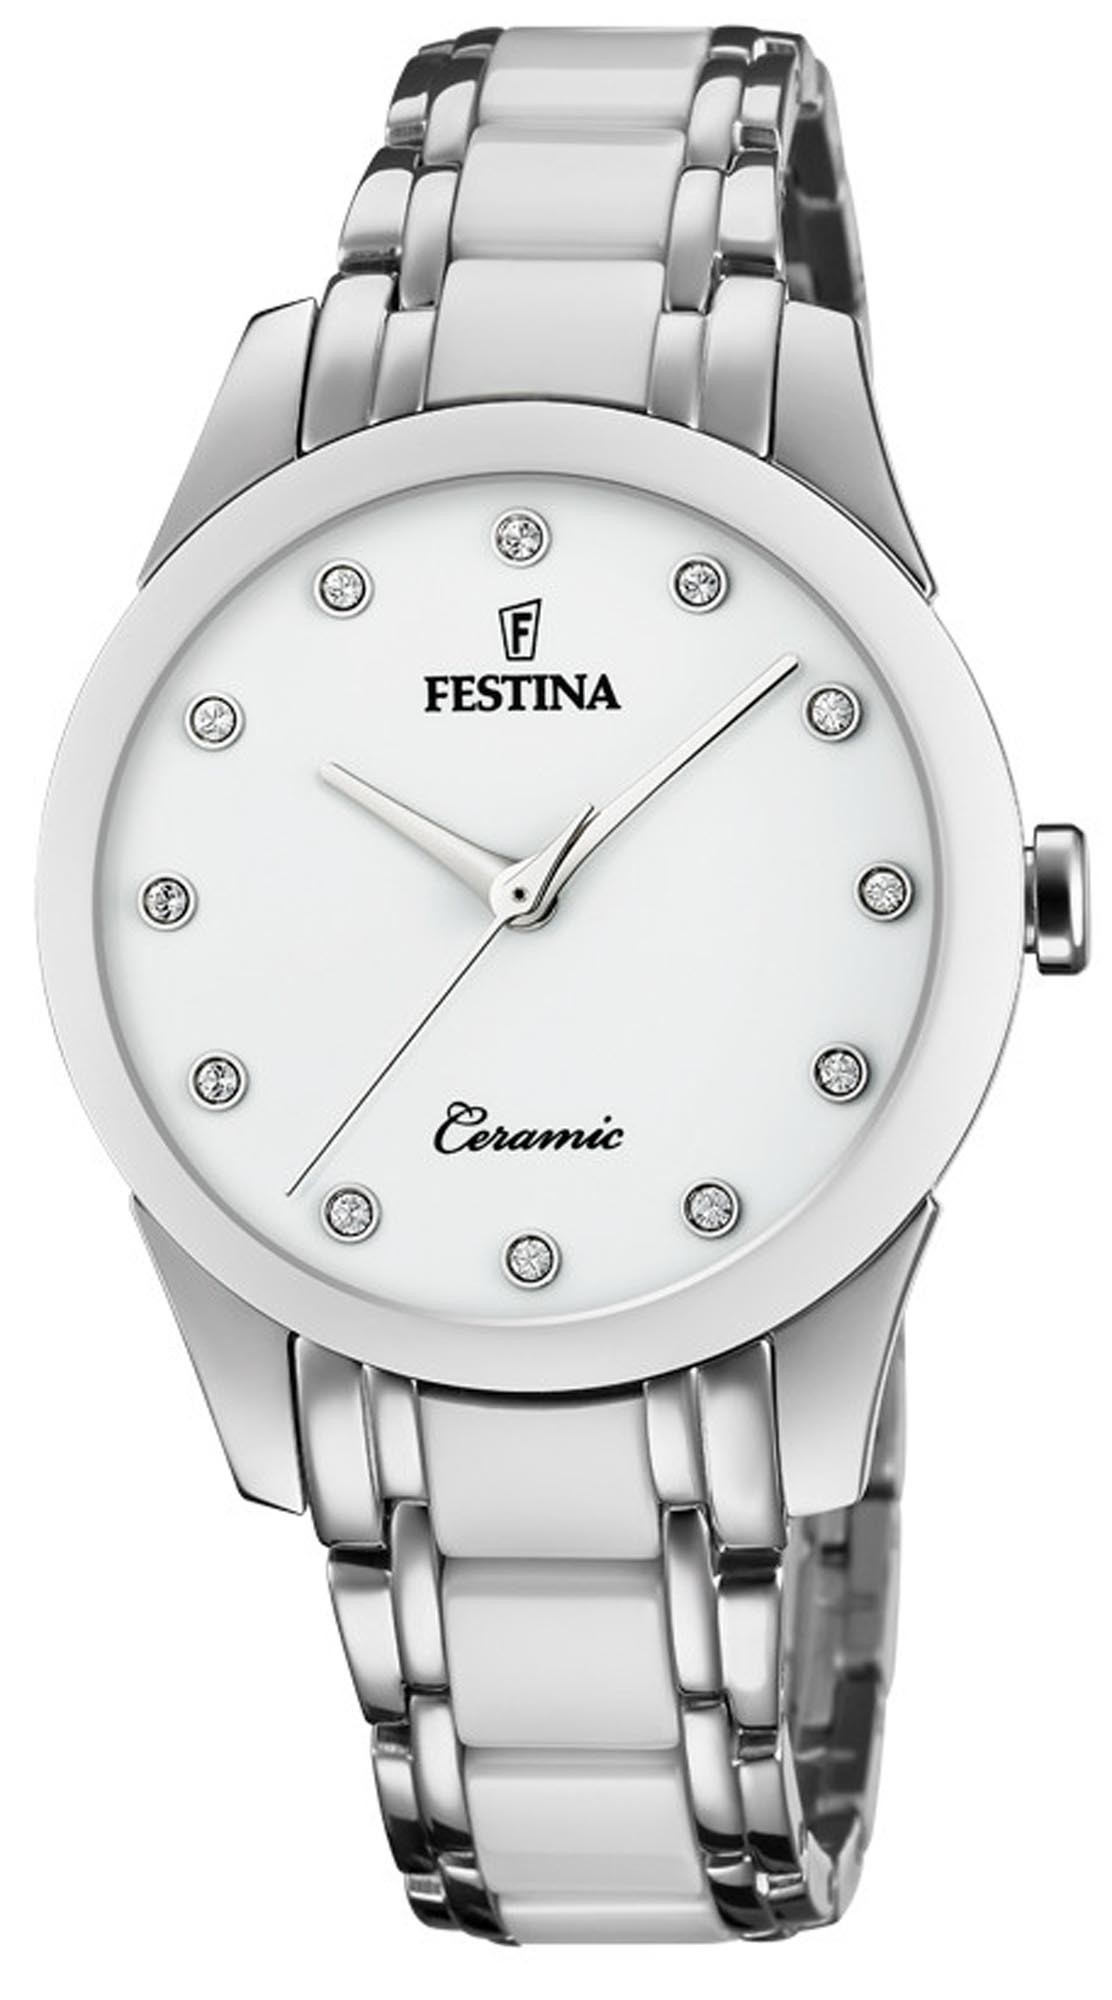 Festina Women's Watch Festina Ceramic F20499/1 Women's Watch Round Case Dial with Mineral Crystal Stainless Steel Strap 150853 F20499/1 | Comprar Watch Festina Ceramic F20499/1 Watch with Round Case